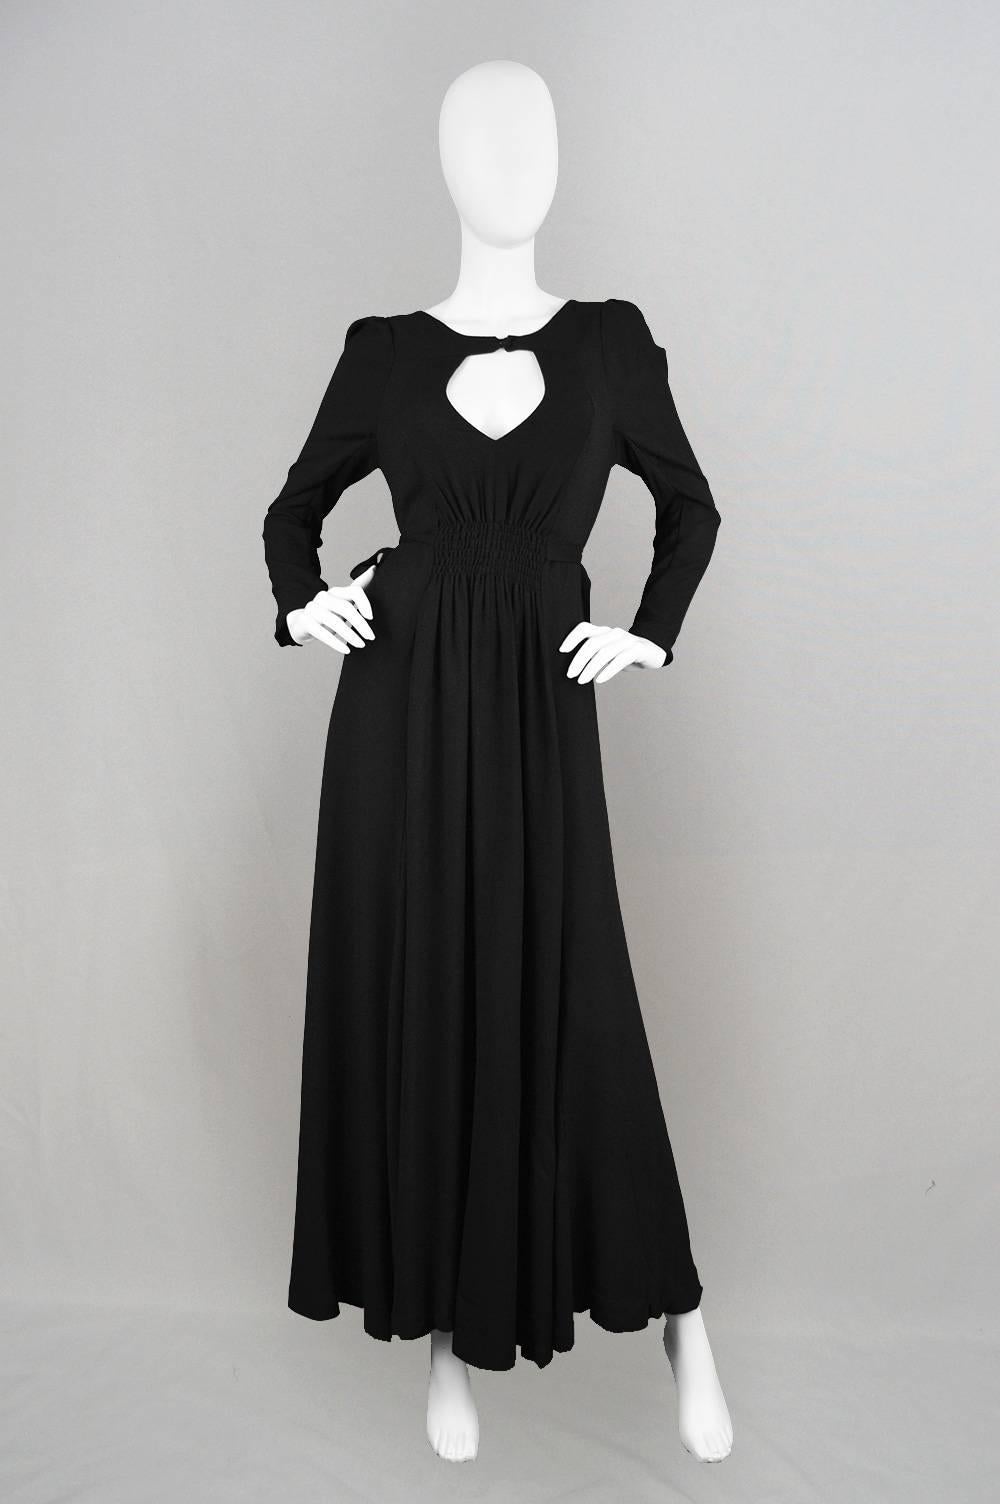 Ossie Clark for Quorum 1970s Moss Crepe Backless Keyhole Black Evening Dress In Excellent Condition For Sale In Doncaster, South Yorkshire